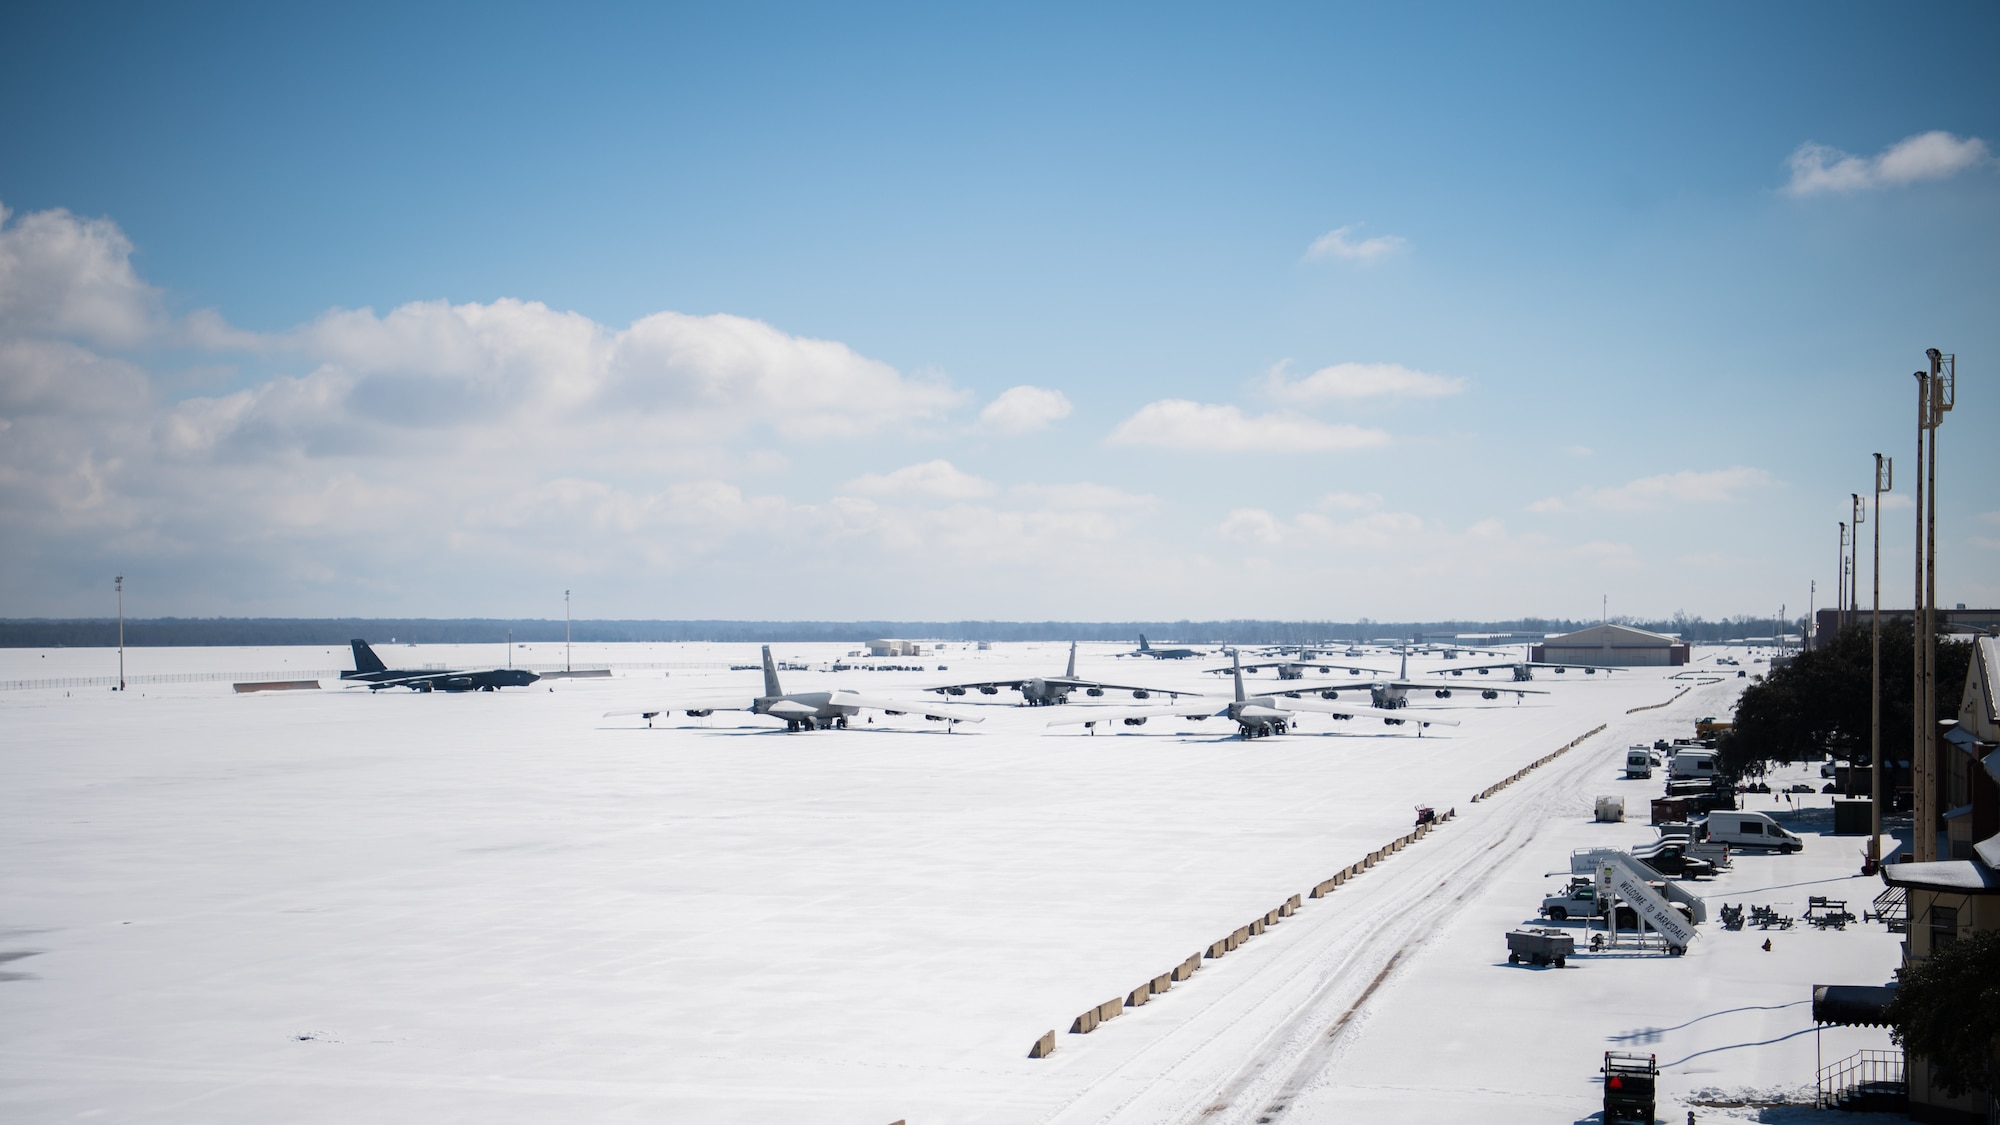 Snow covered B-52H Stratofortresses sit on the flightline at Barksdale Air Force Base, La., Feb. 19, 2021. Barksdale measured approximately four inches of snow Feb. 14 and 15. An additional two inches of snow and sleet were recorded on Feb. 17. (U.S. Air Force photo by Airman 1st Class Jacob B. Wrightsman)